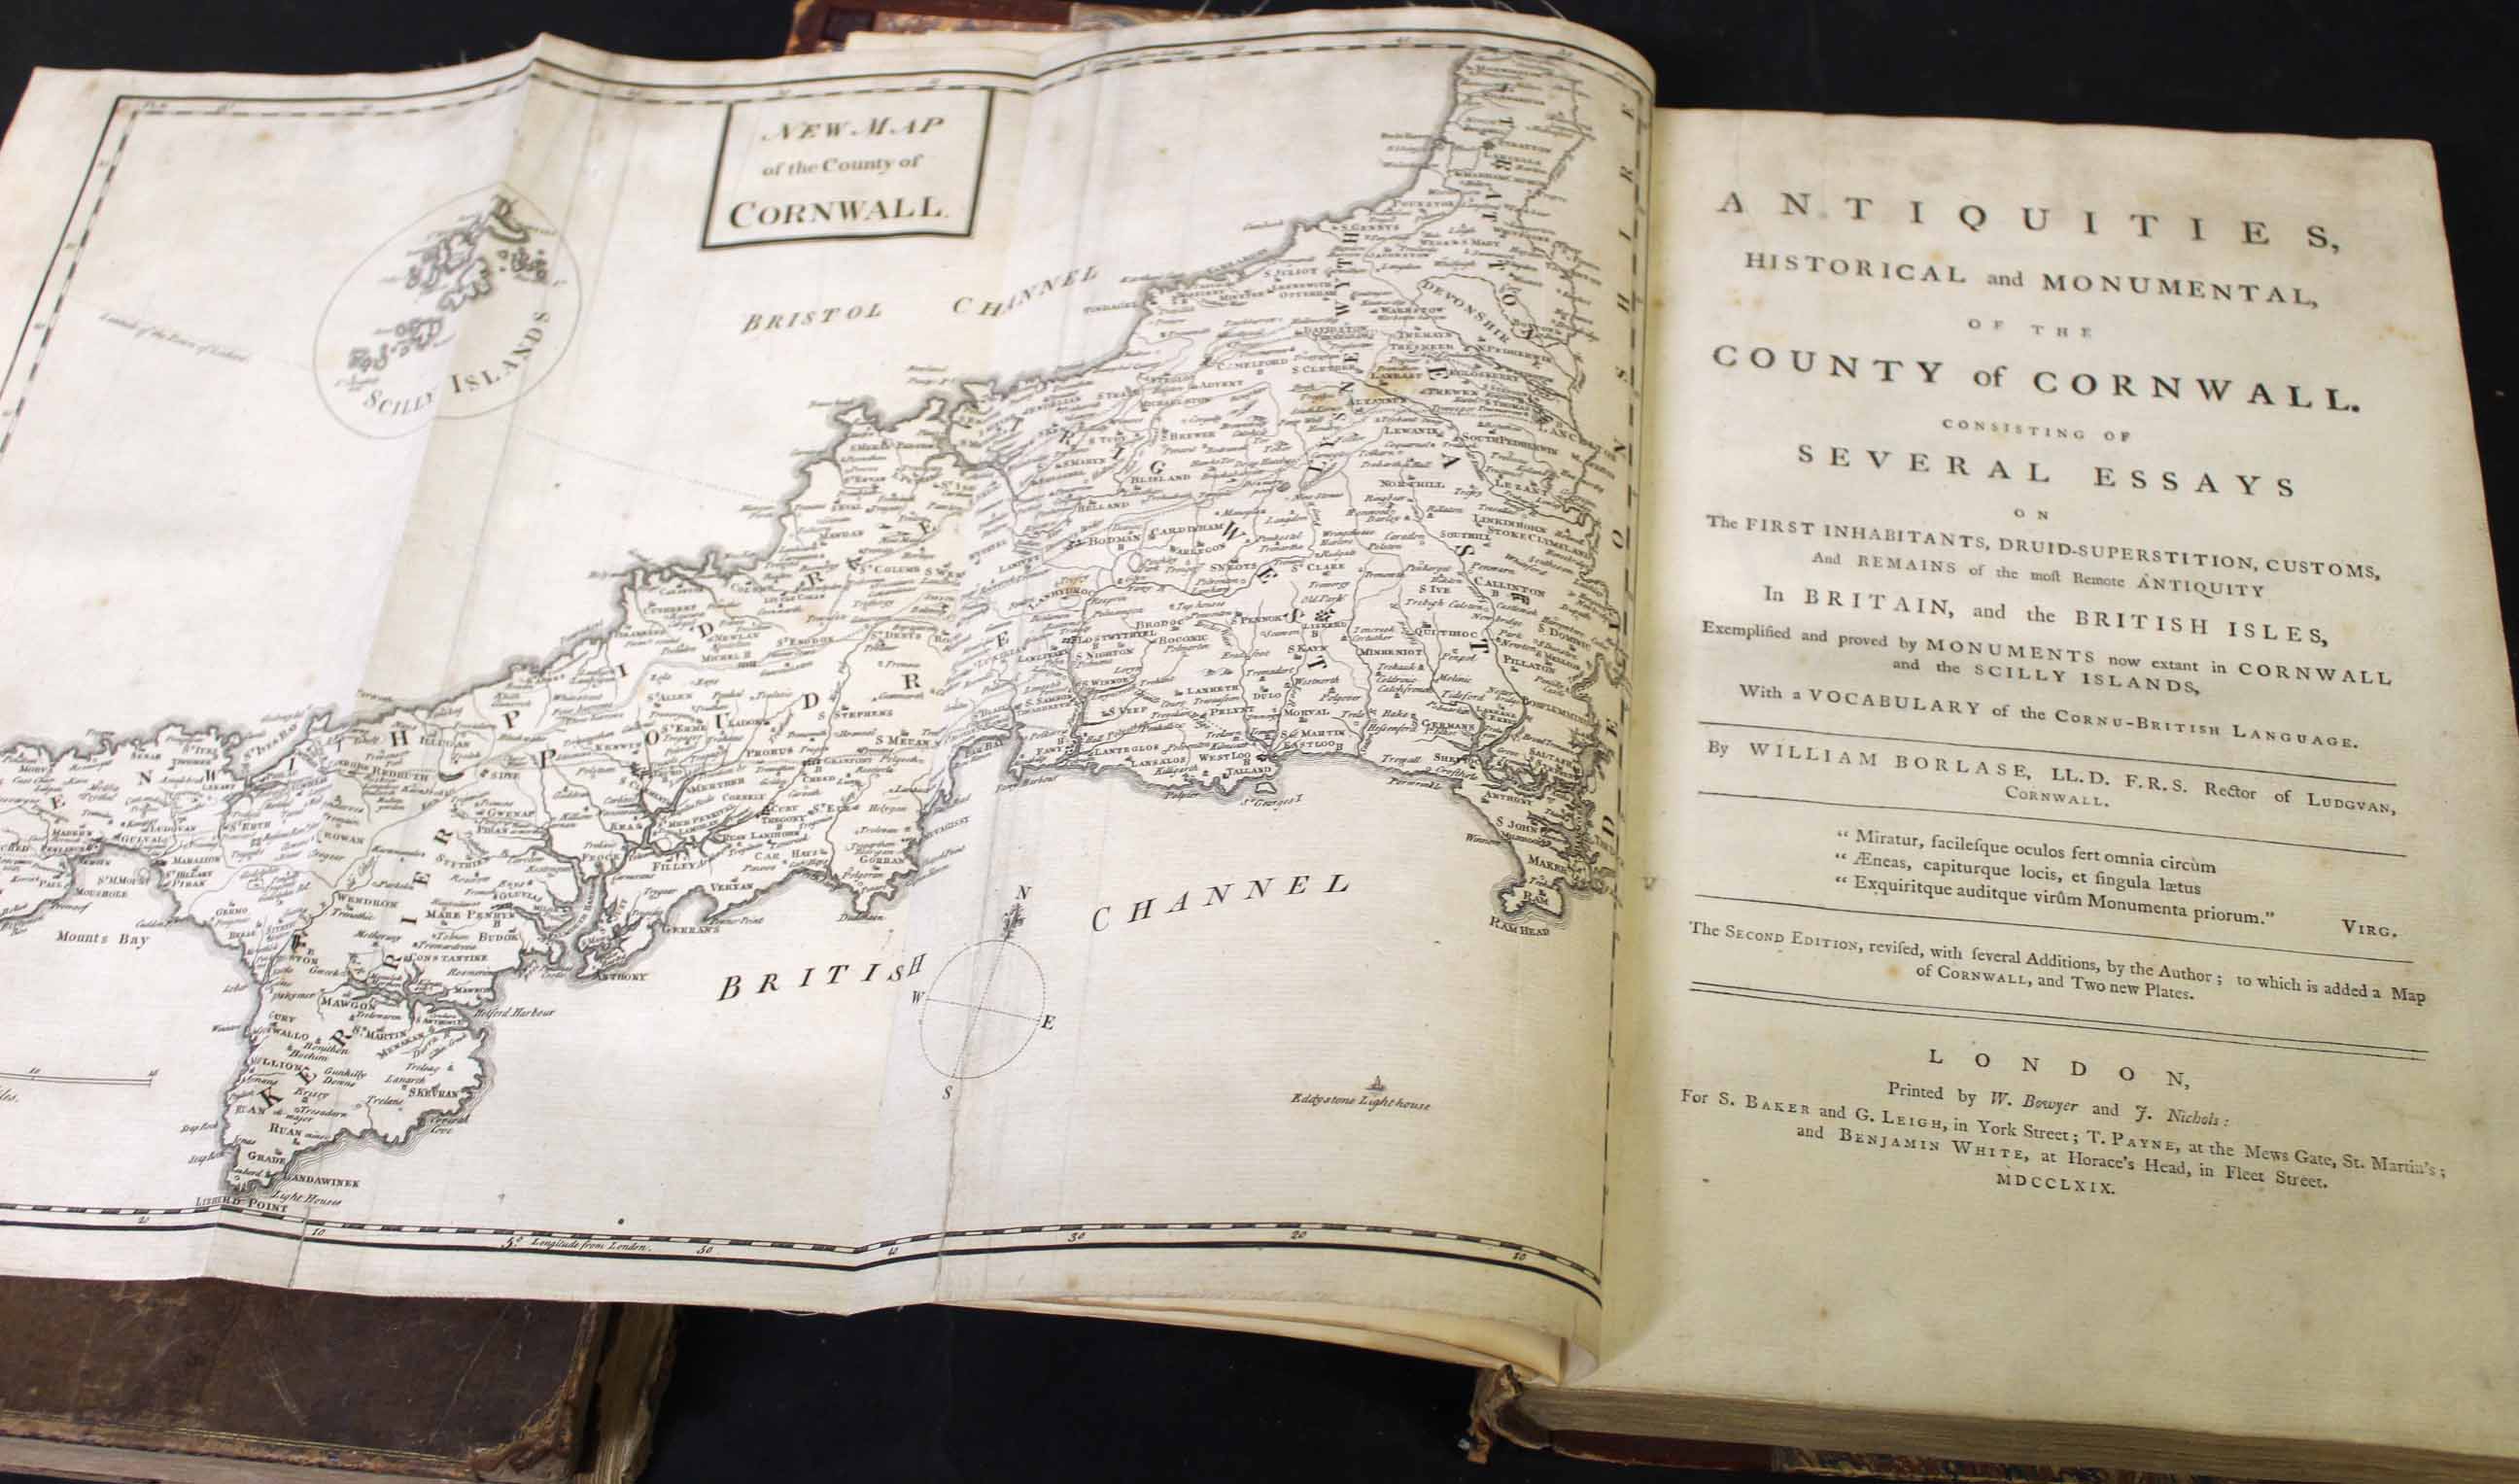 WILLIAM BORLASE: ANTIQUITIES, HISTORICAL AND MONUMENTAL OF THE COUNTY OF CORNWALL CONTAINING OF